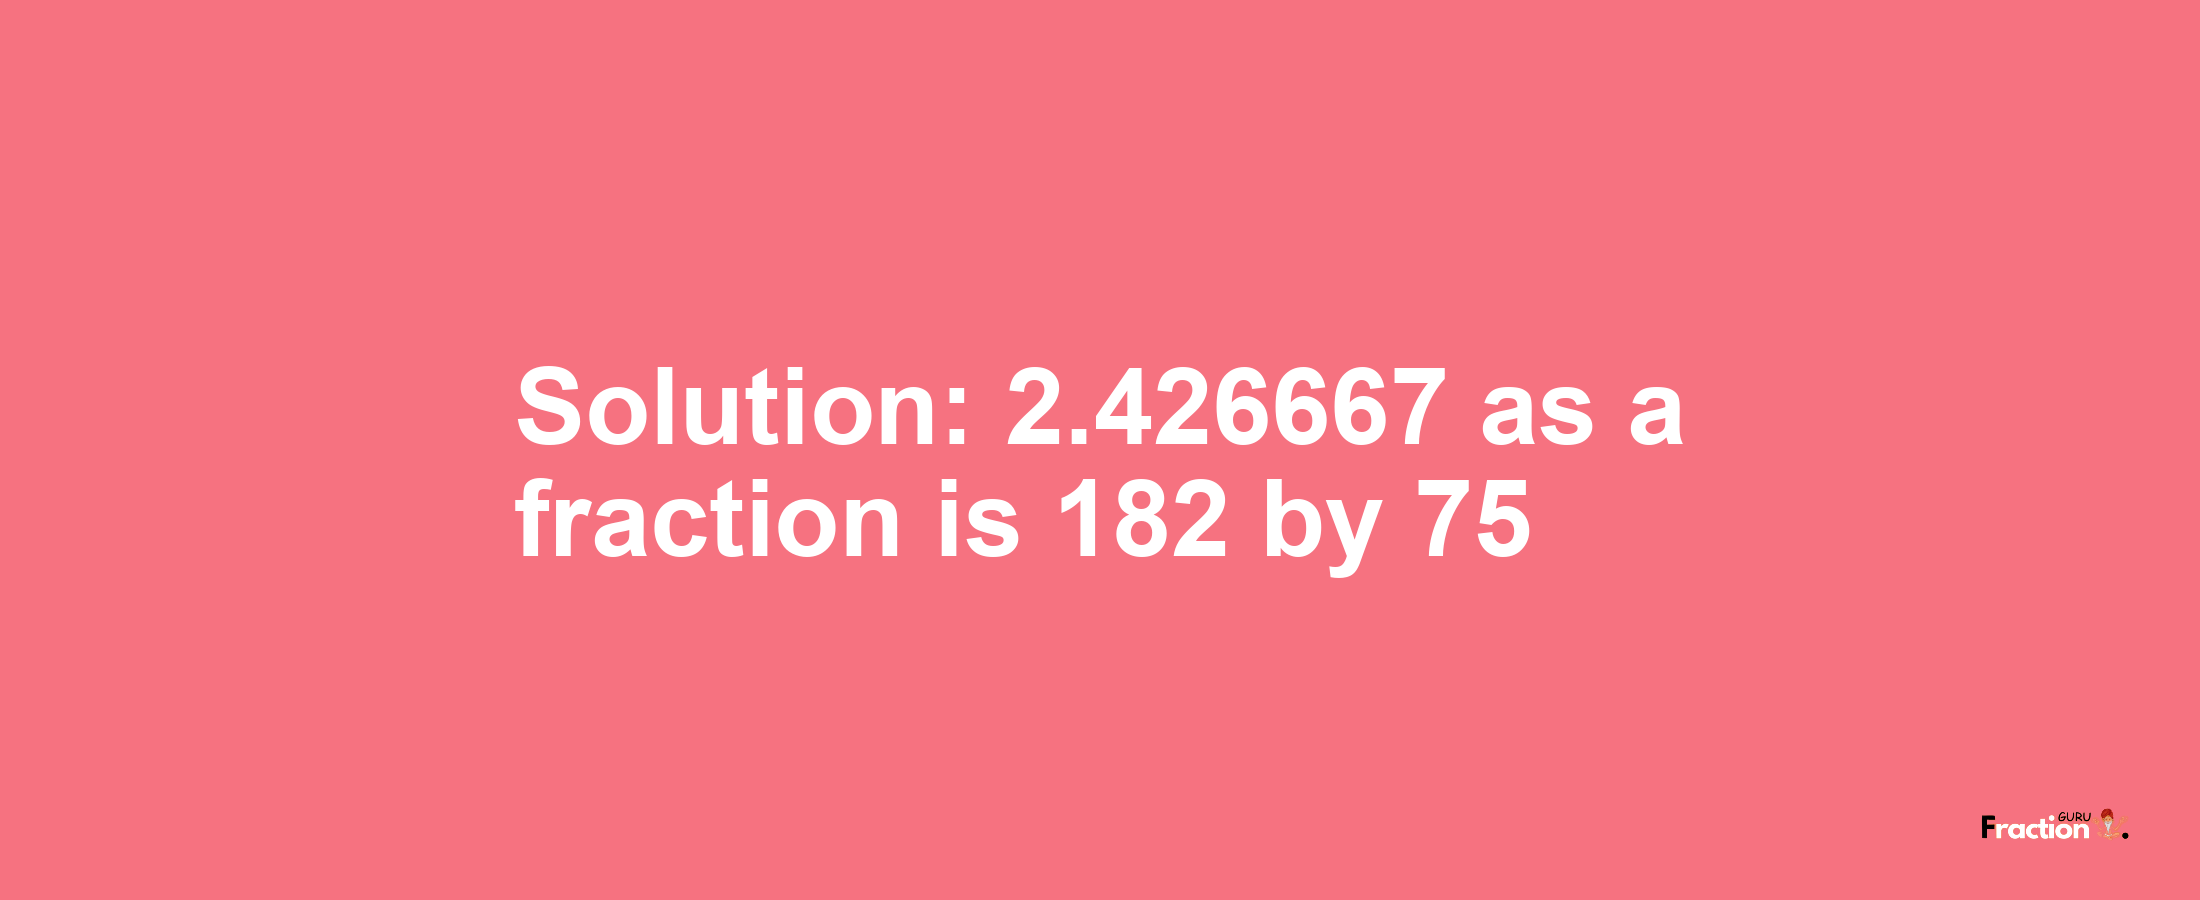 Solution:2.426667 as a fraction is 182/75